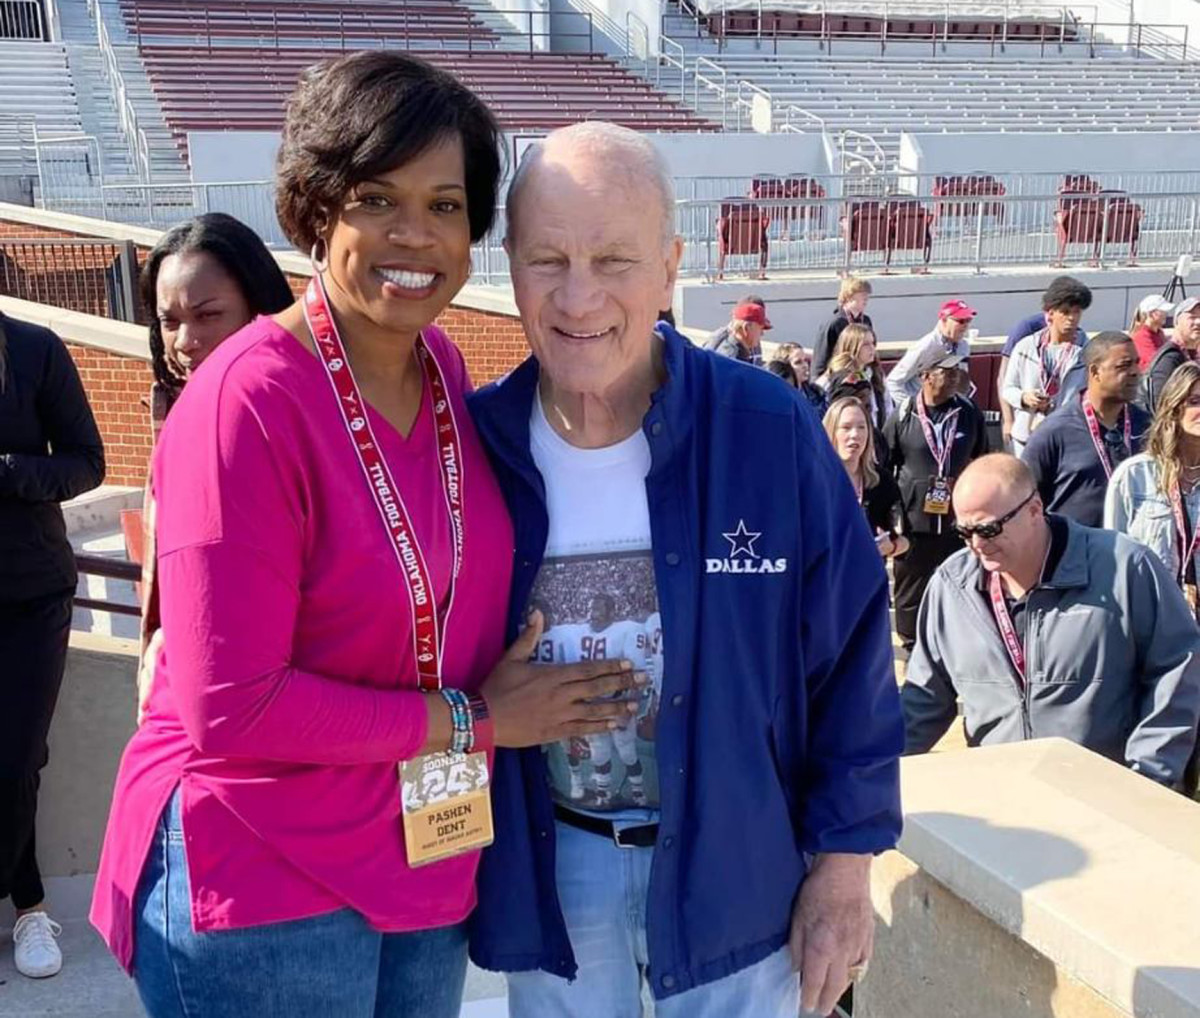 Pashen Thompson-Dent and Barry Switzer